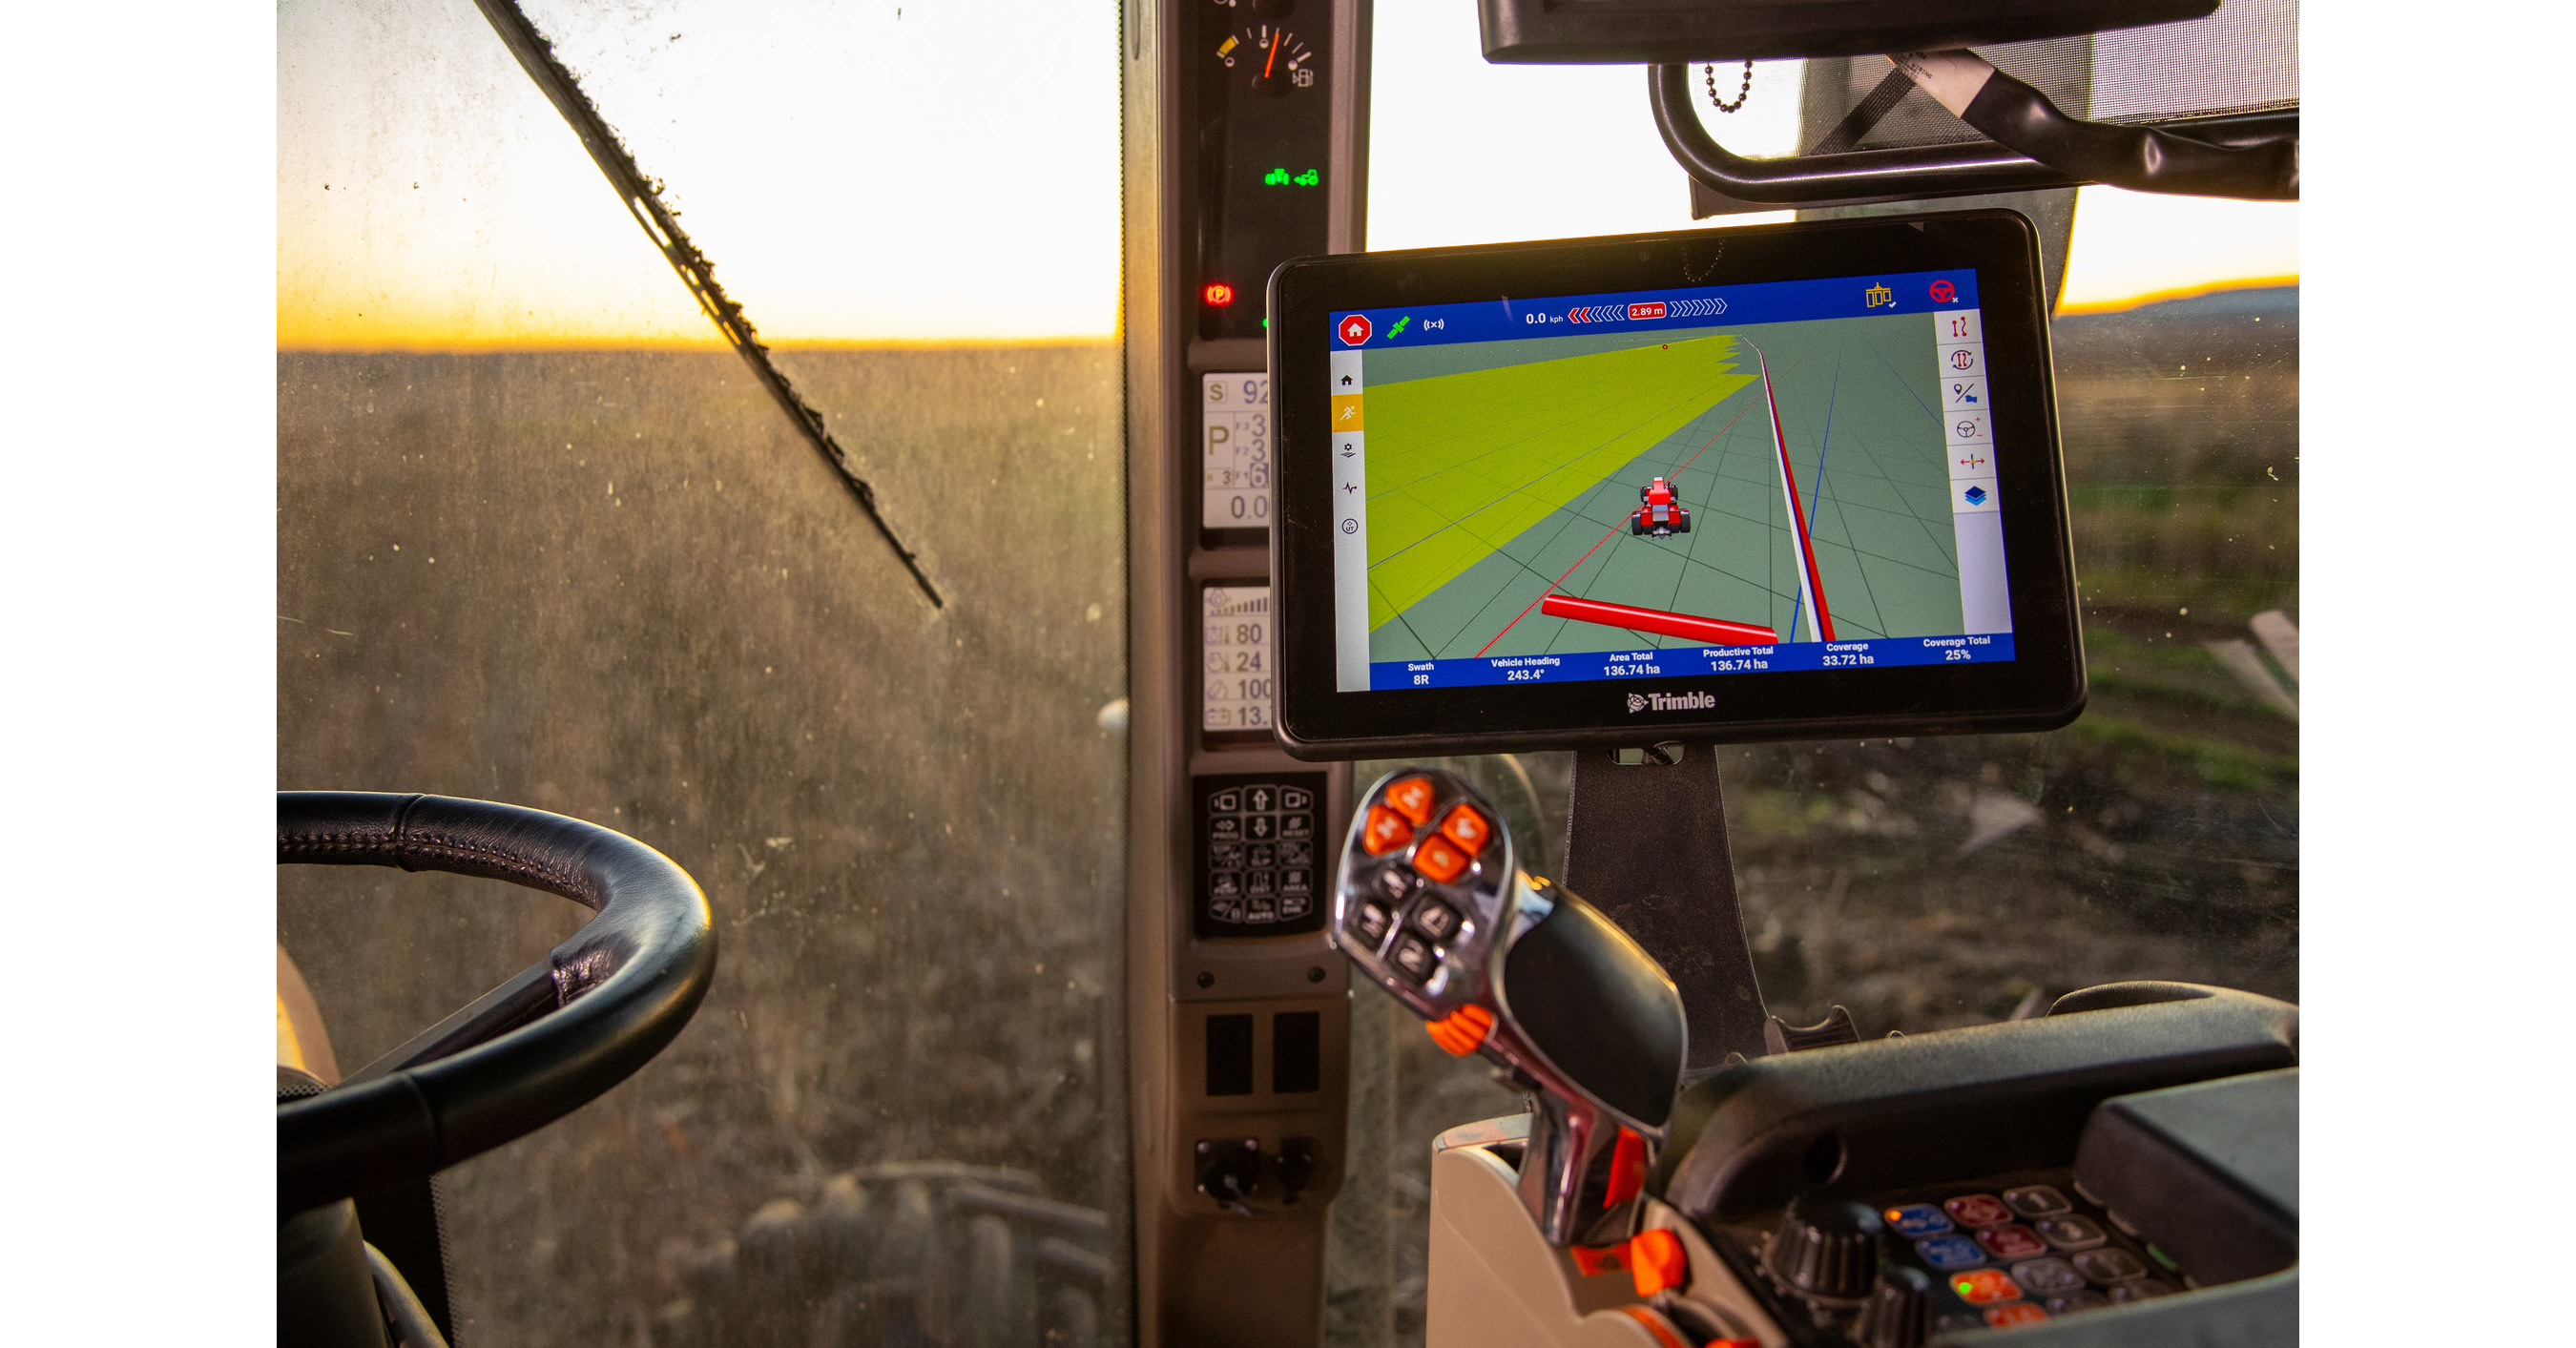 Trimble's New Agriculture Displays Provide Next-Generation Performance and Connectivity for In-Field Operations